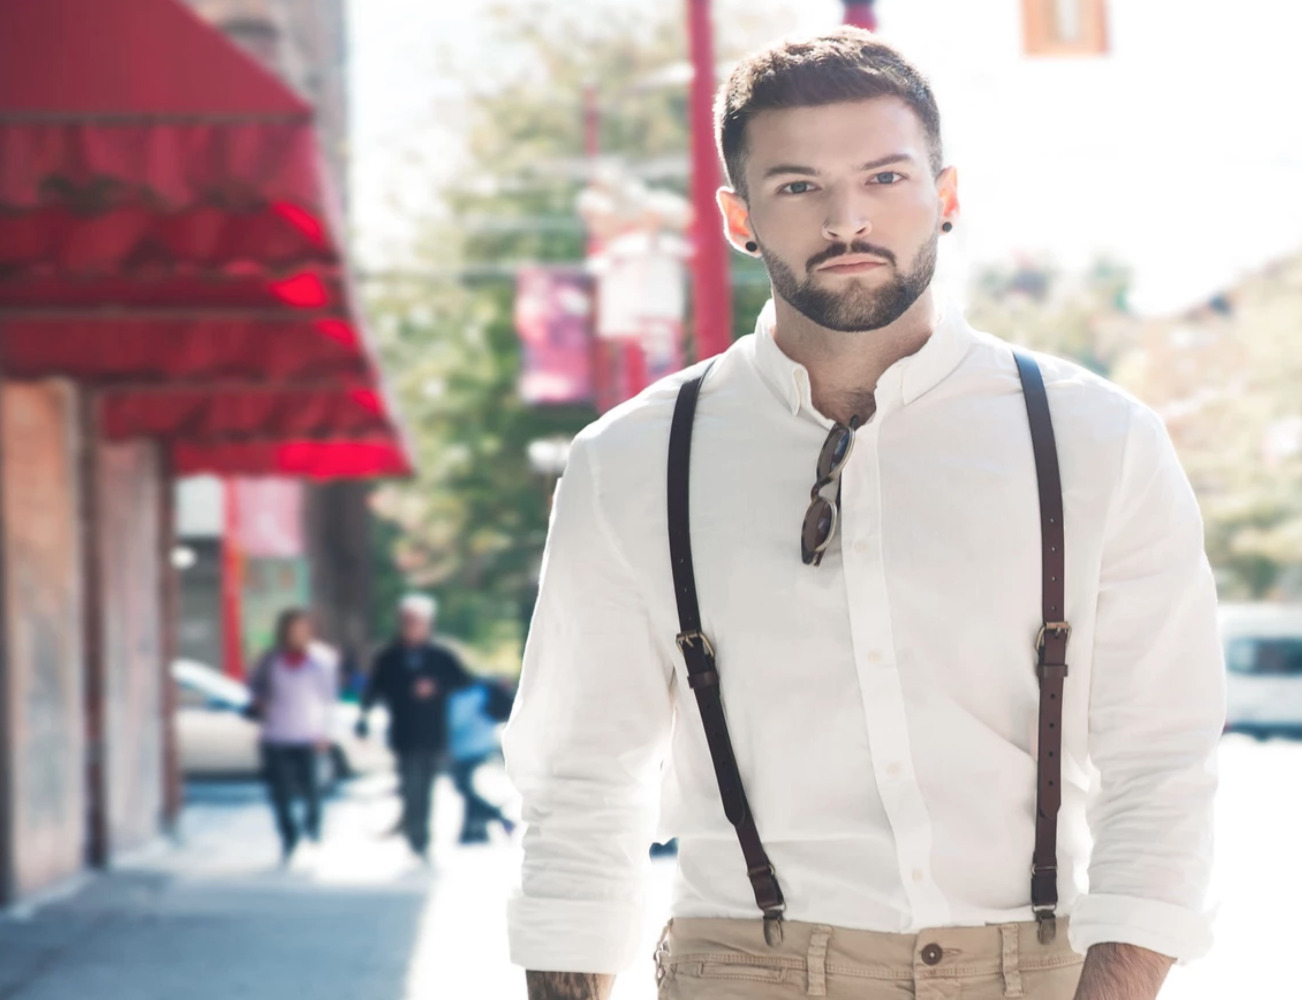 13 Amazing Leather Suspenders For Men for 2023